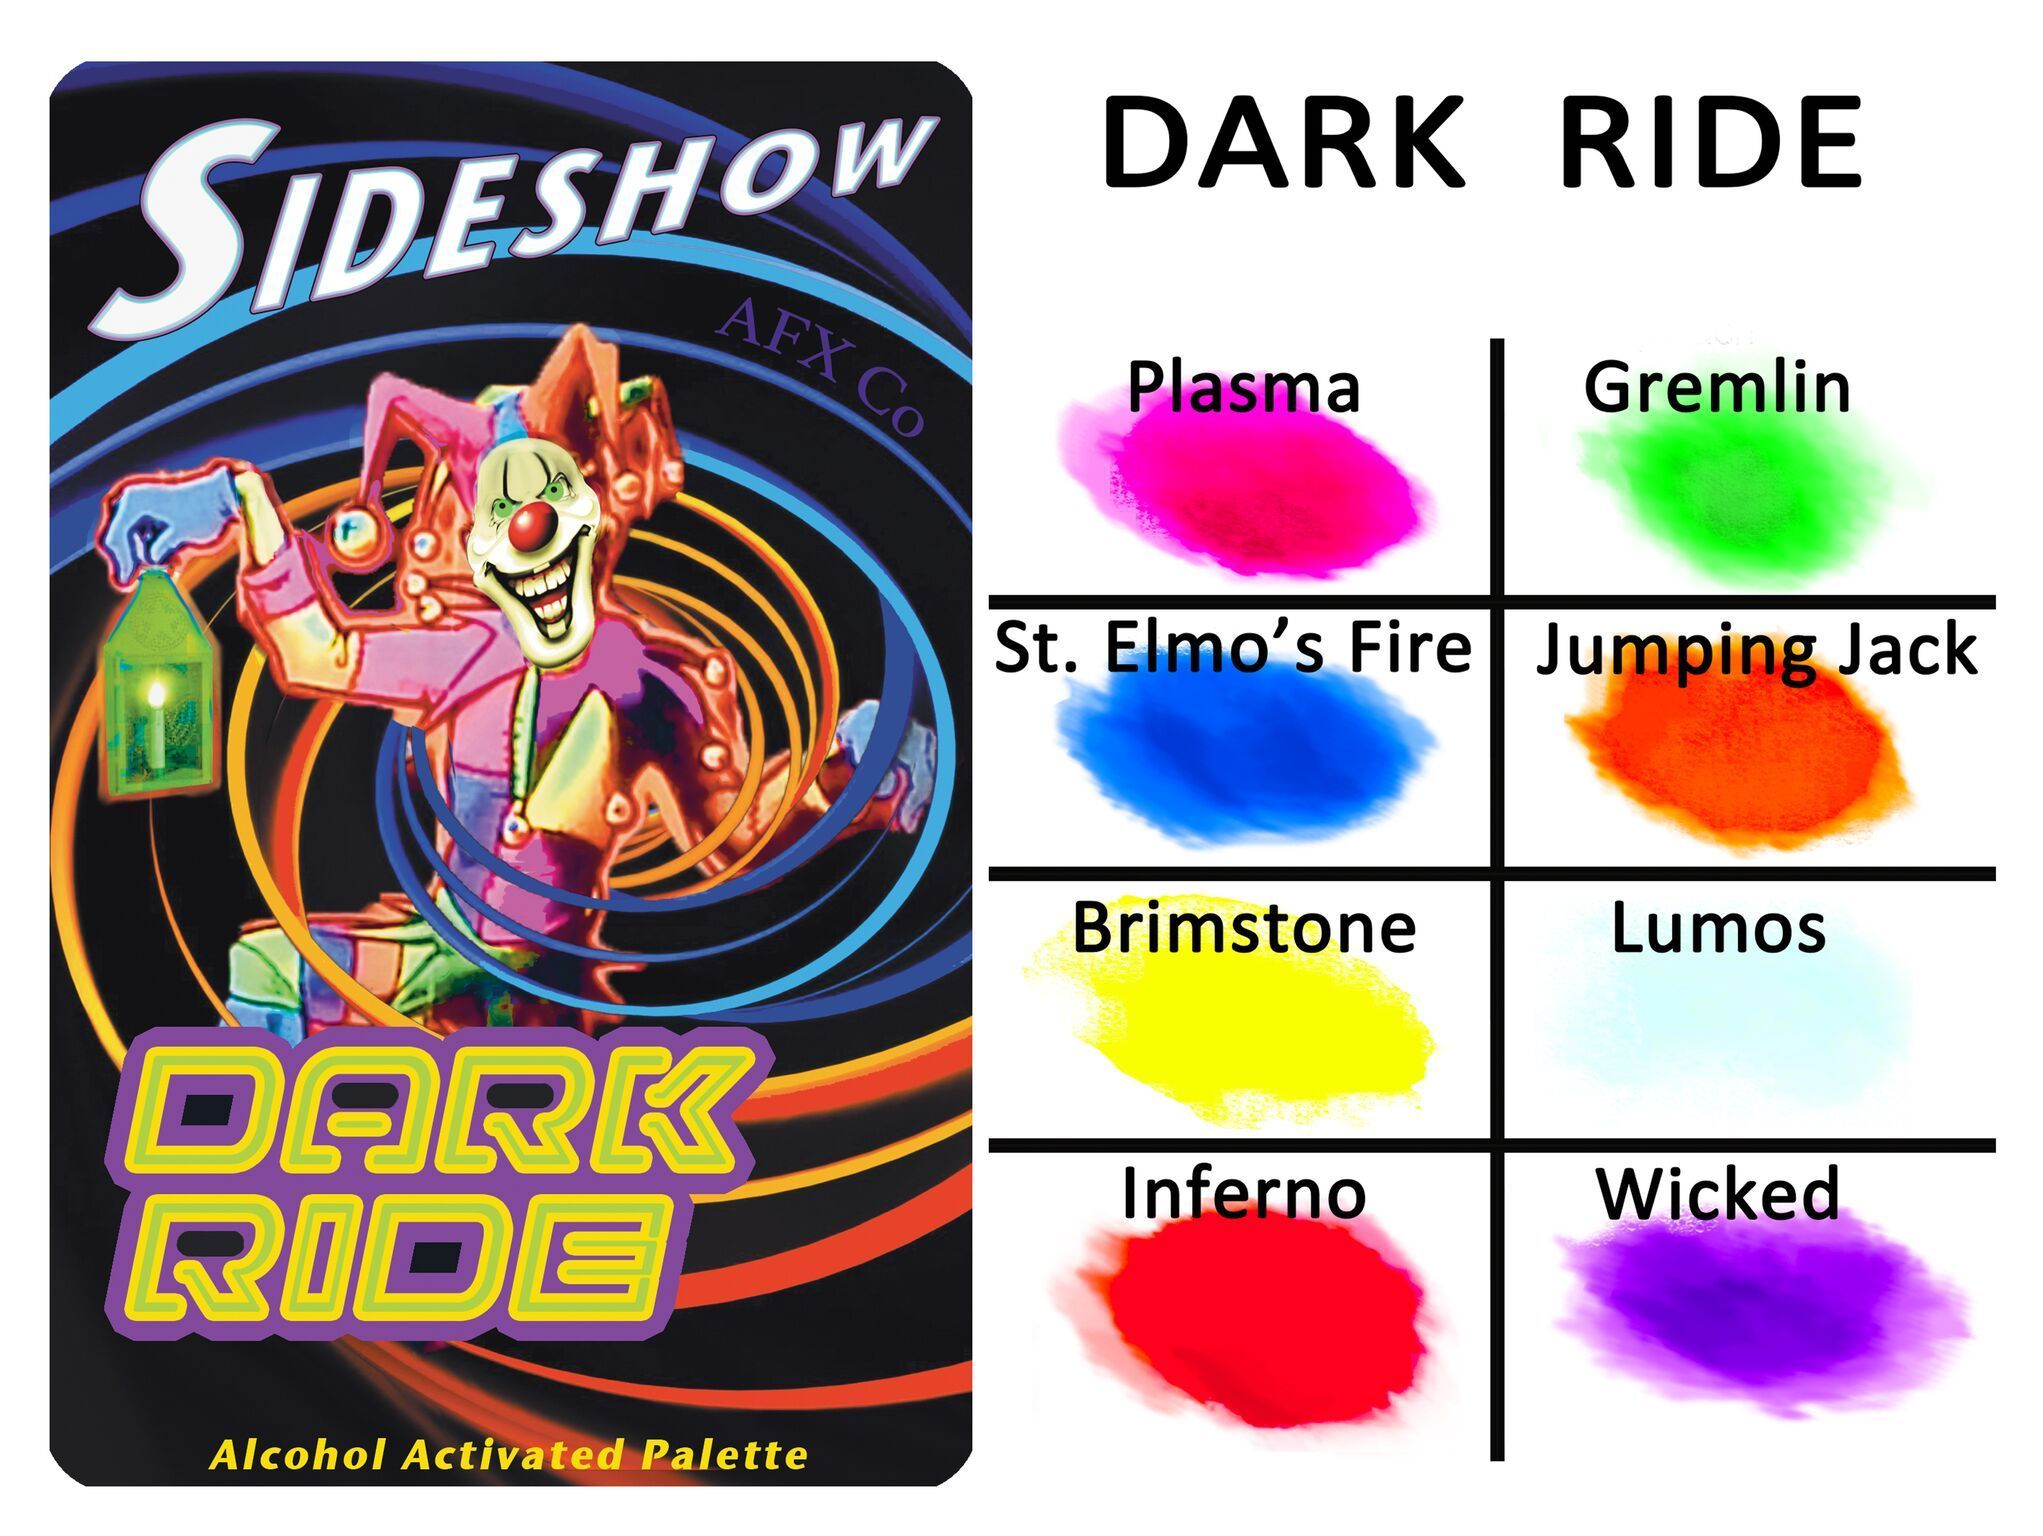 Sideshow Alcohol Activated Makeup Palette Dark Ride